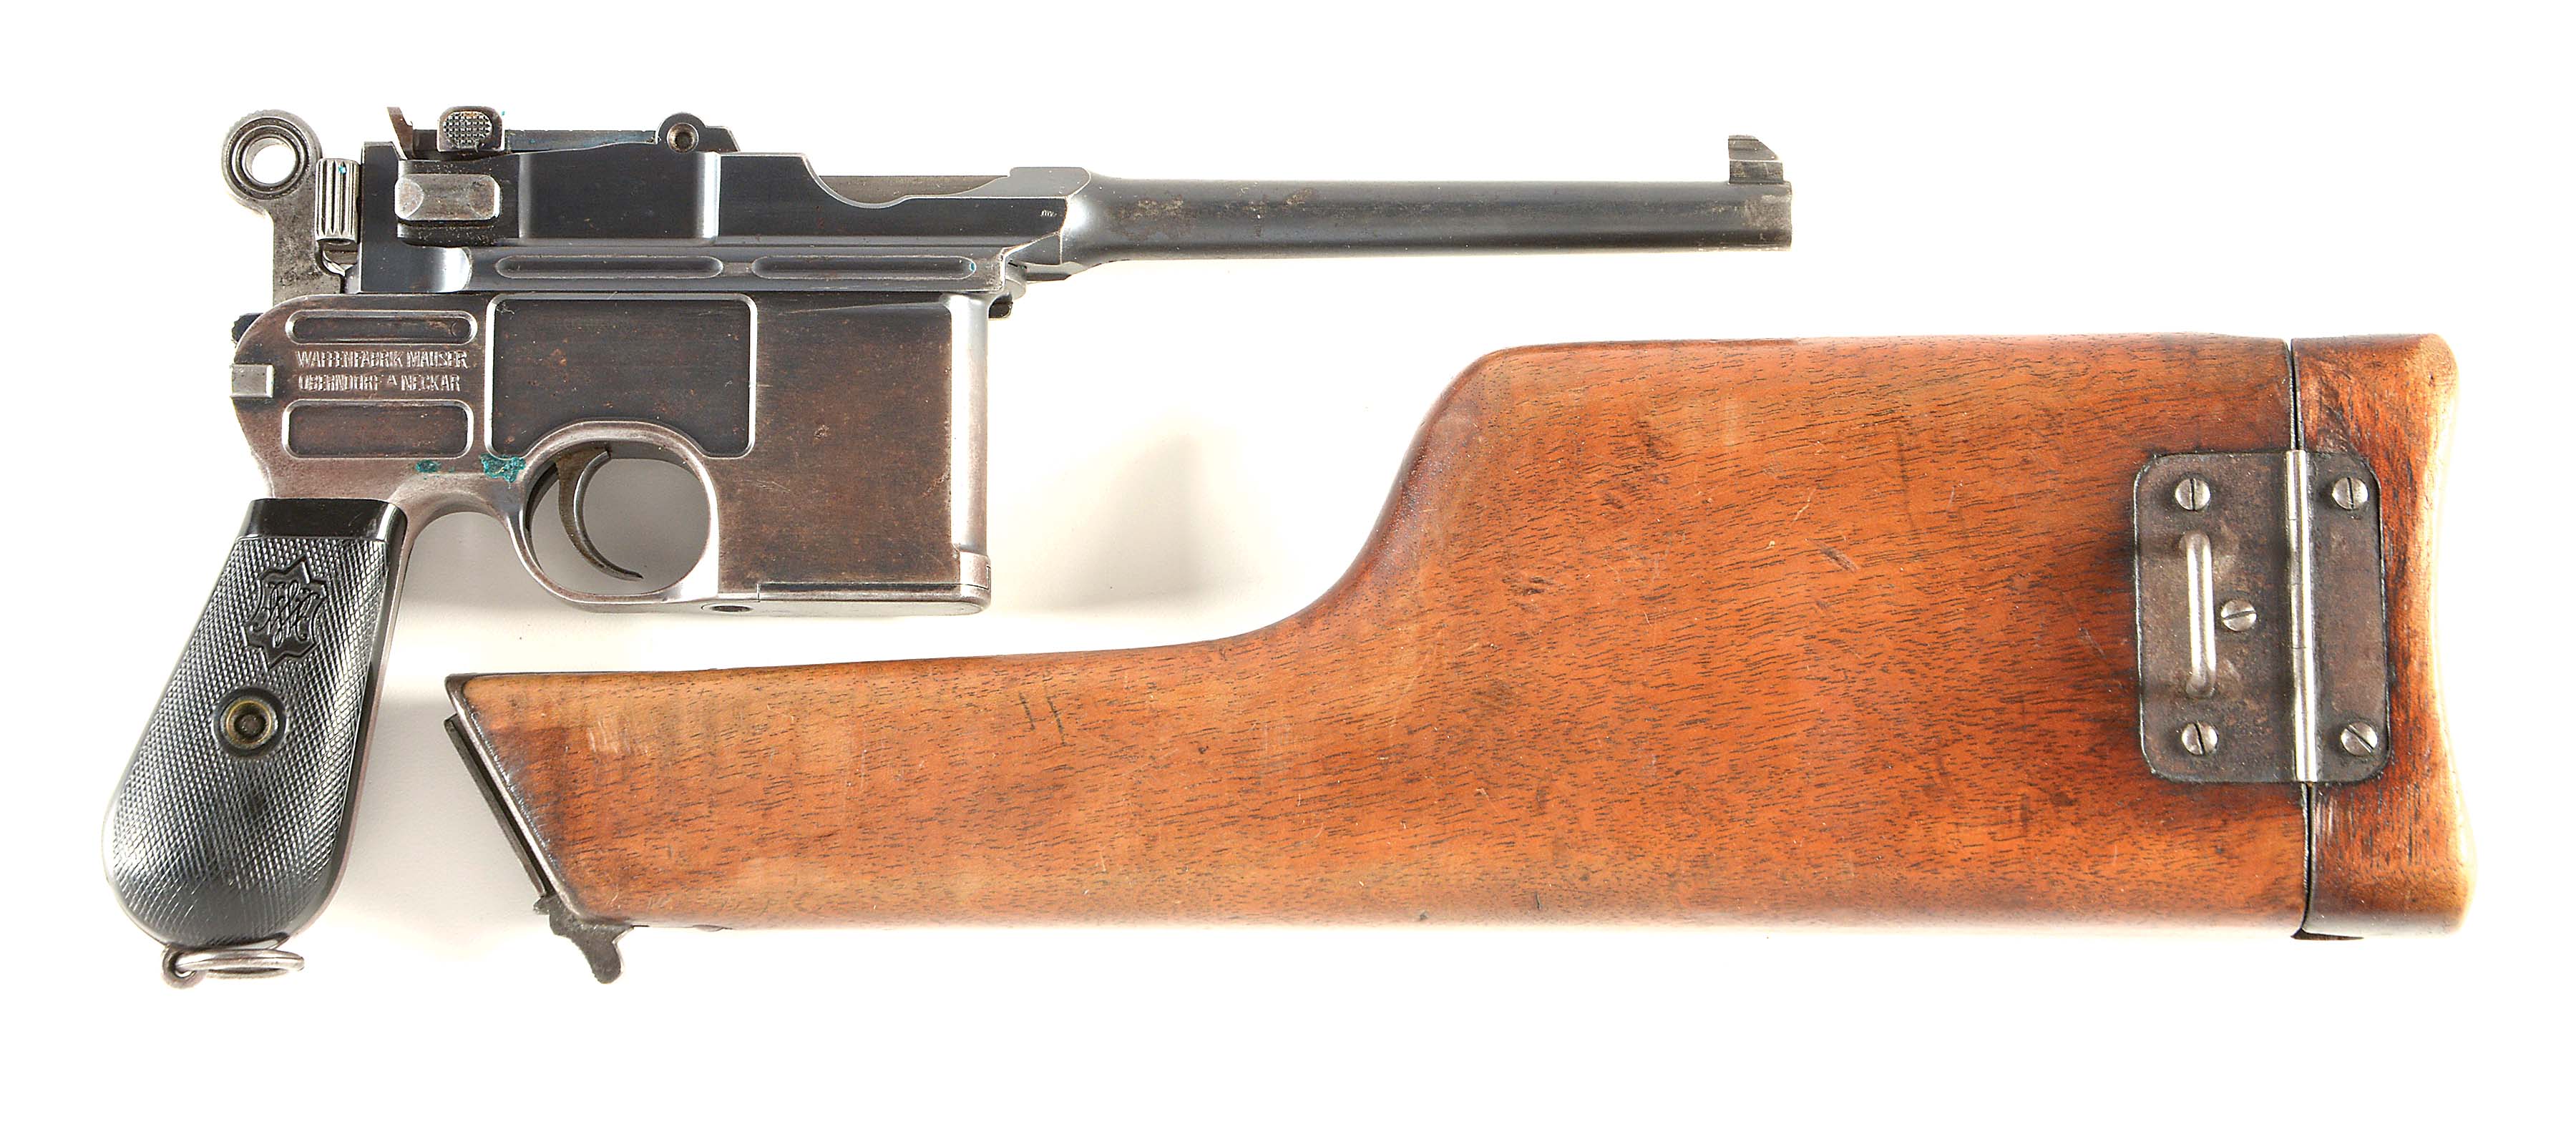 C) VL&a marked late shallow-milled large ring mauser C96 semi-automatic...